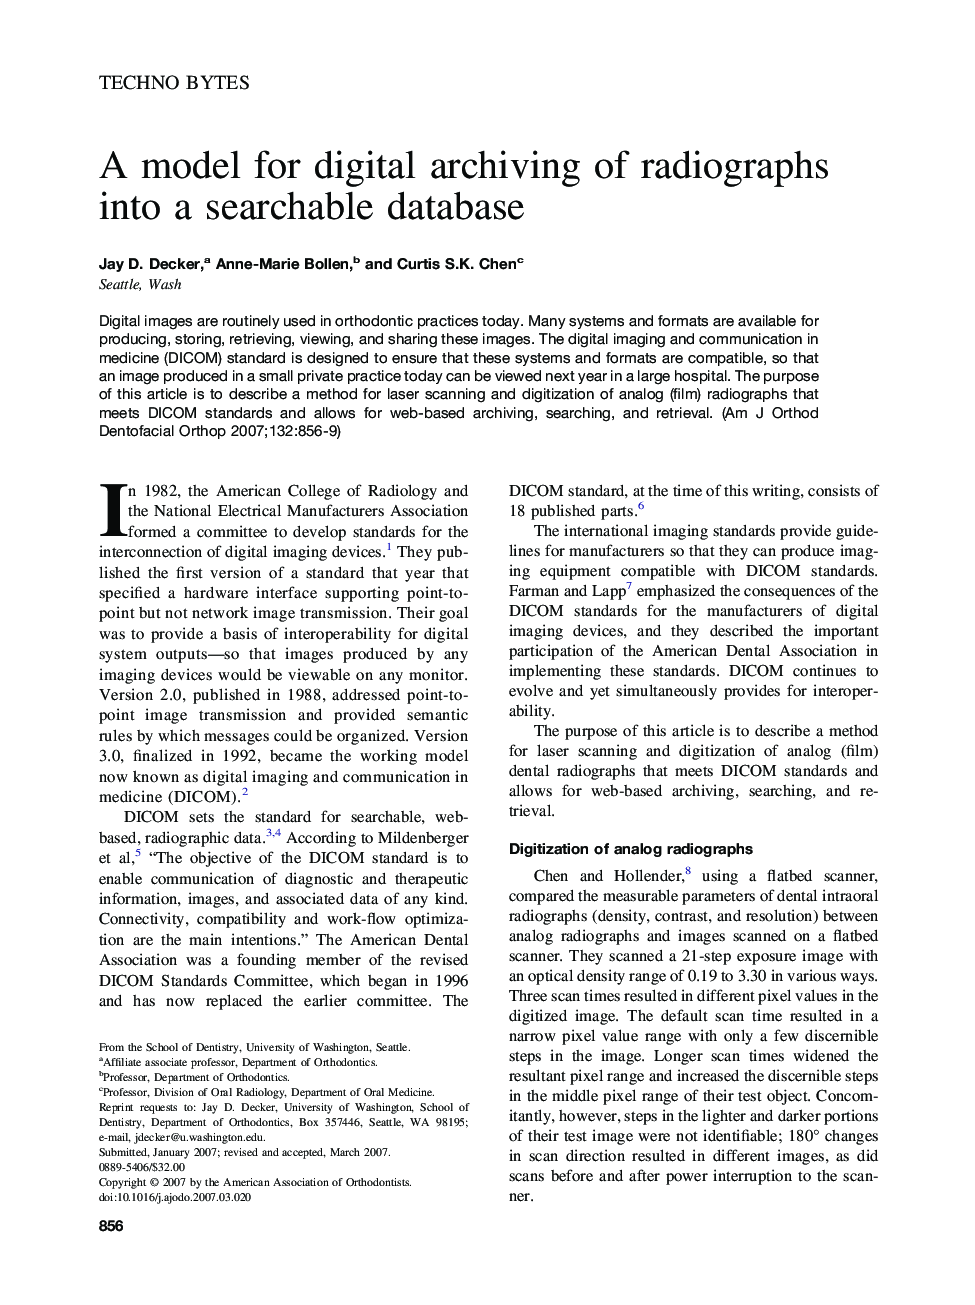 A model for digital archiving of radiographs into a searchable database